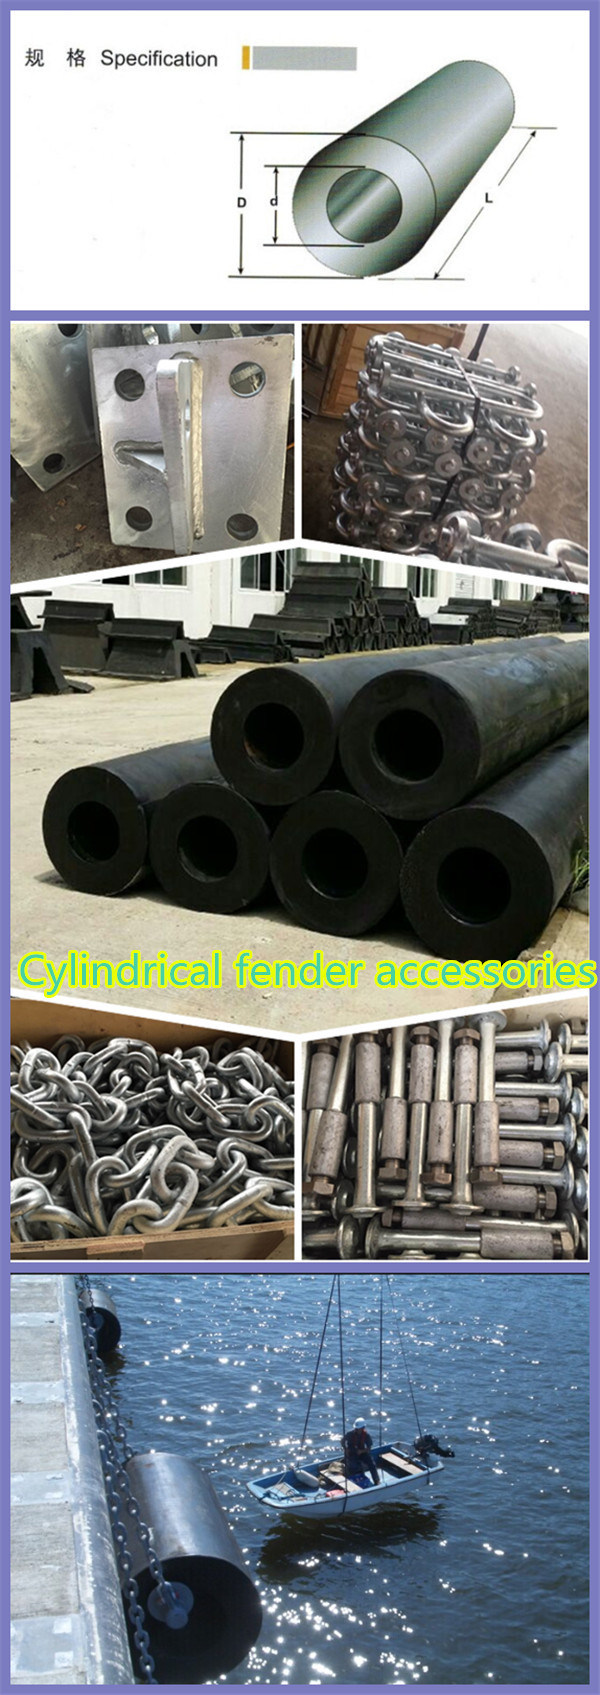 Type Y Cylindrical Rubber Fender